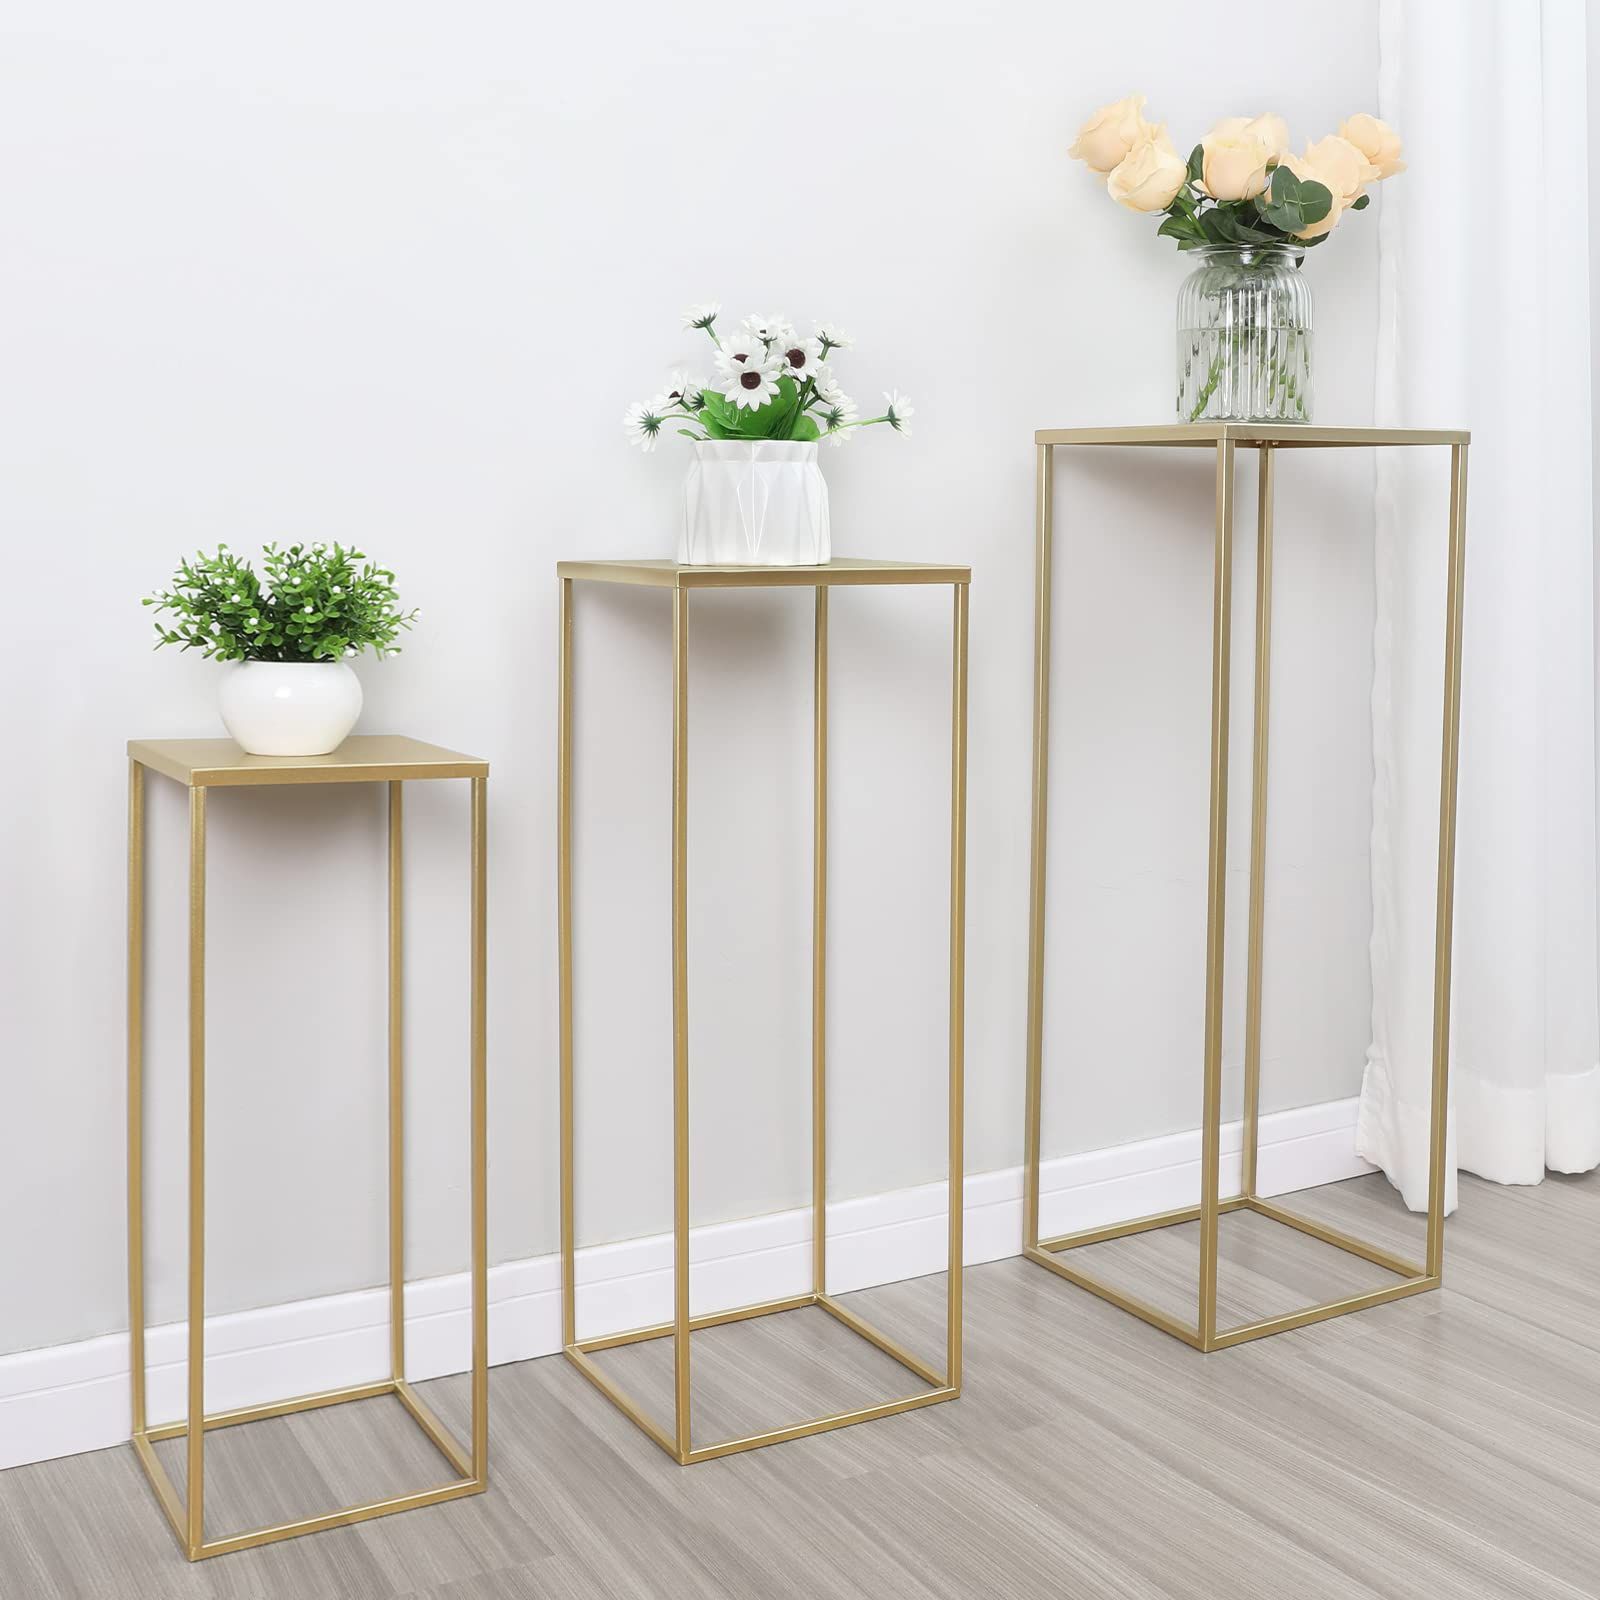 Most Recent Set Of 3 Plant Stands Throughout Amazon : Set Of 3 Metal Plant Stand Golden Nesting Display End Table  Tall Pedestal Cylinder Rack, Indoor Outdoor Flower Holder Corner Planter  Pot Rack For Parties Home Decor, Patio Weddings Ceremony : (View 5 of 15)